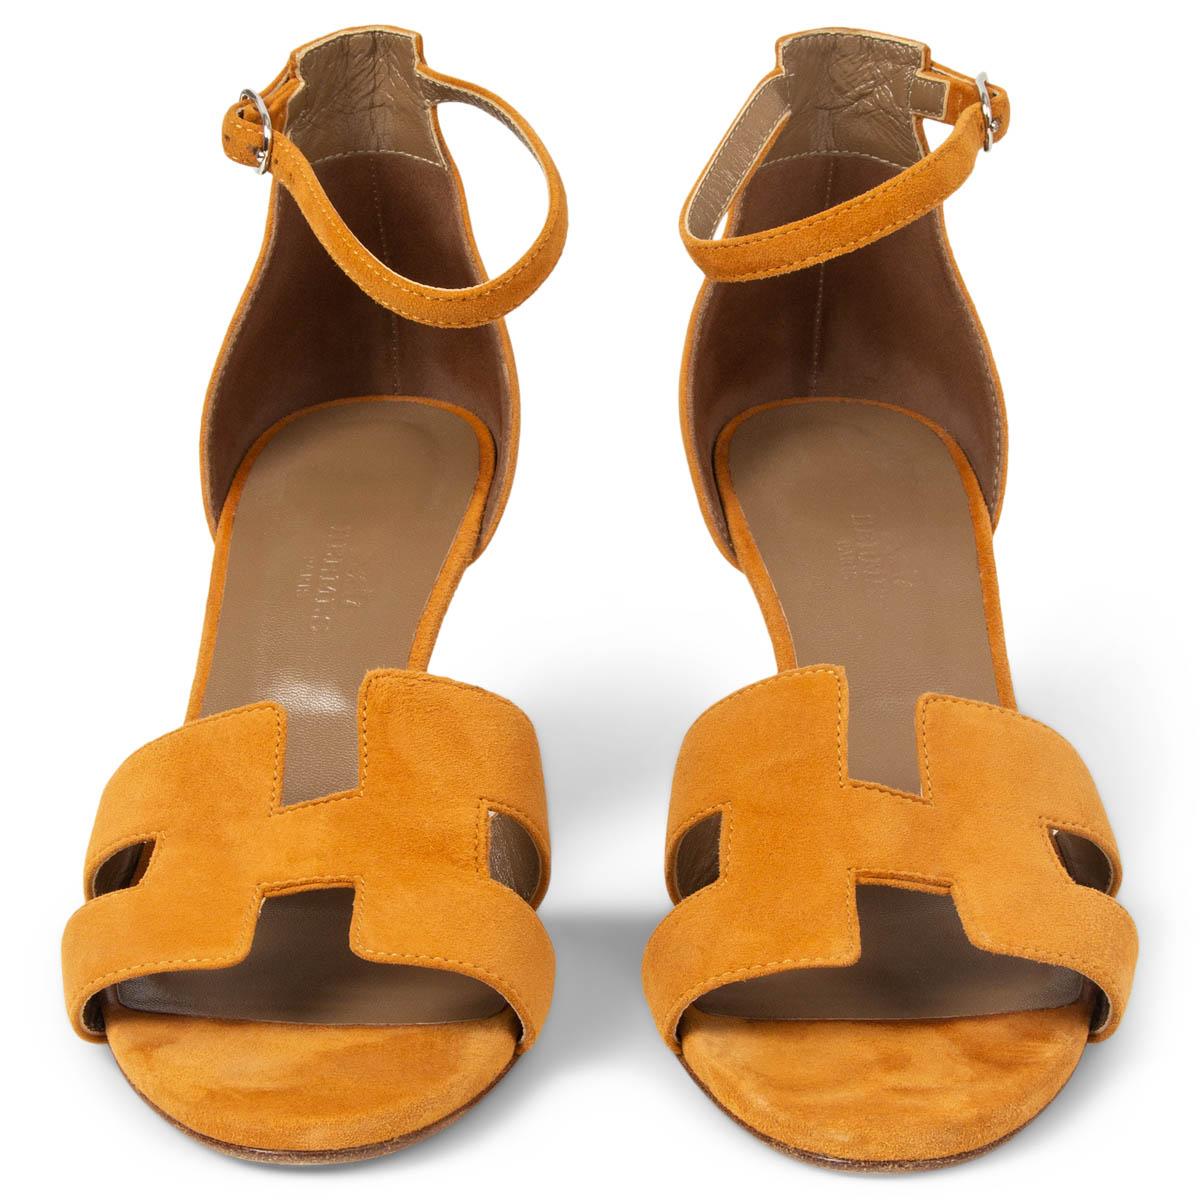 100% authentic Hermès Legend sandals in ochre suede with iconic 